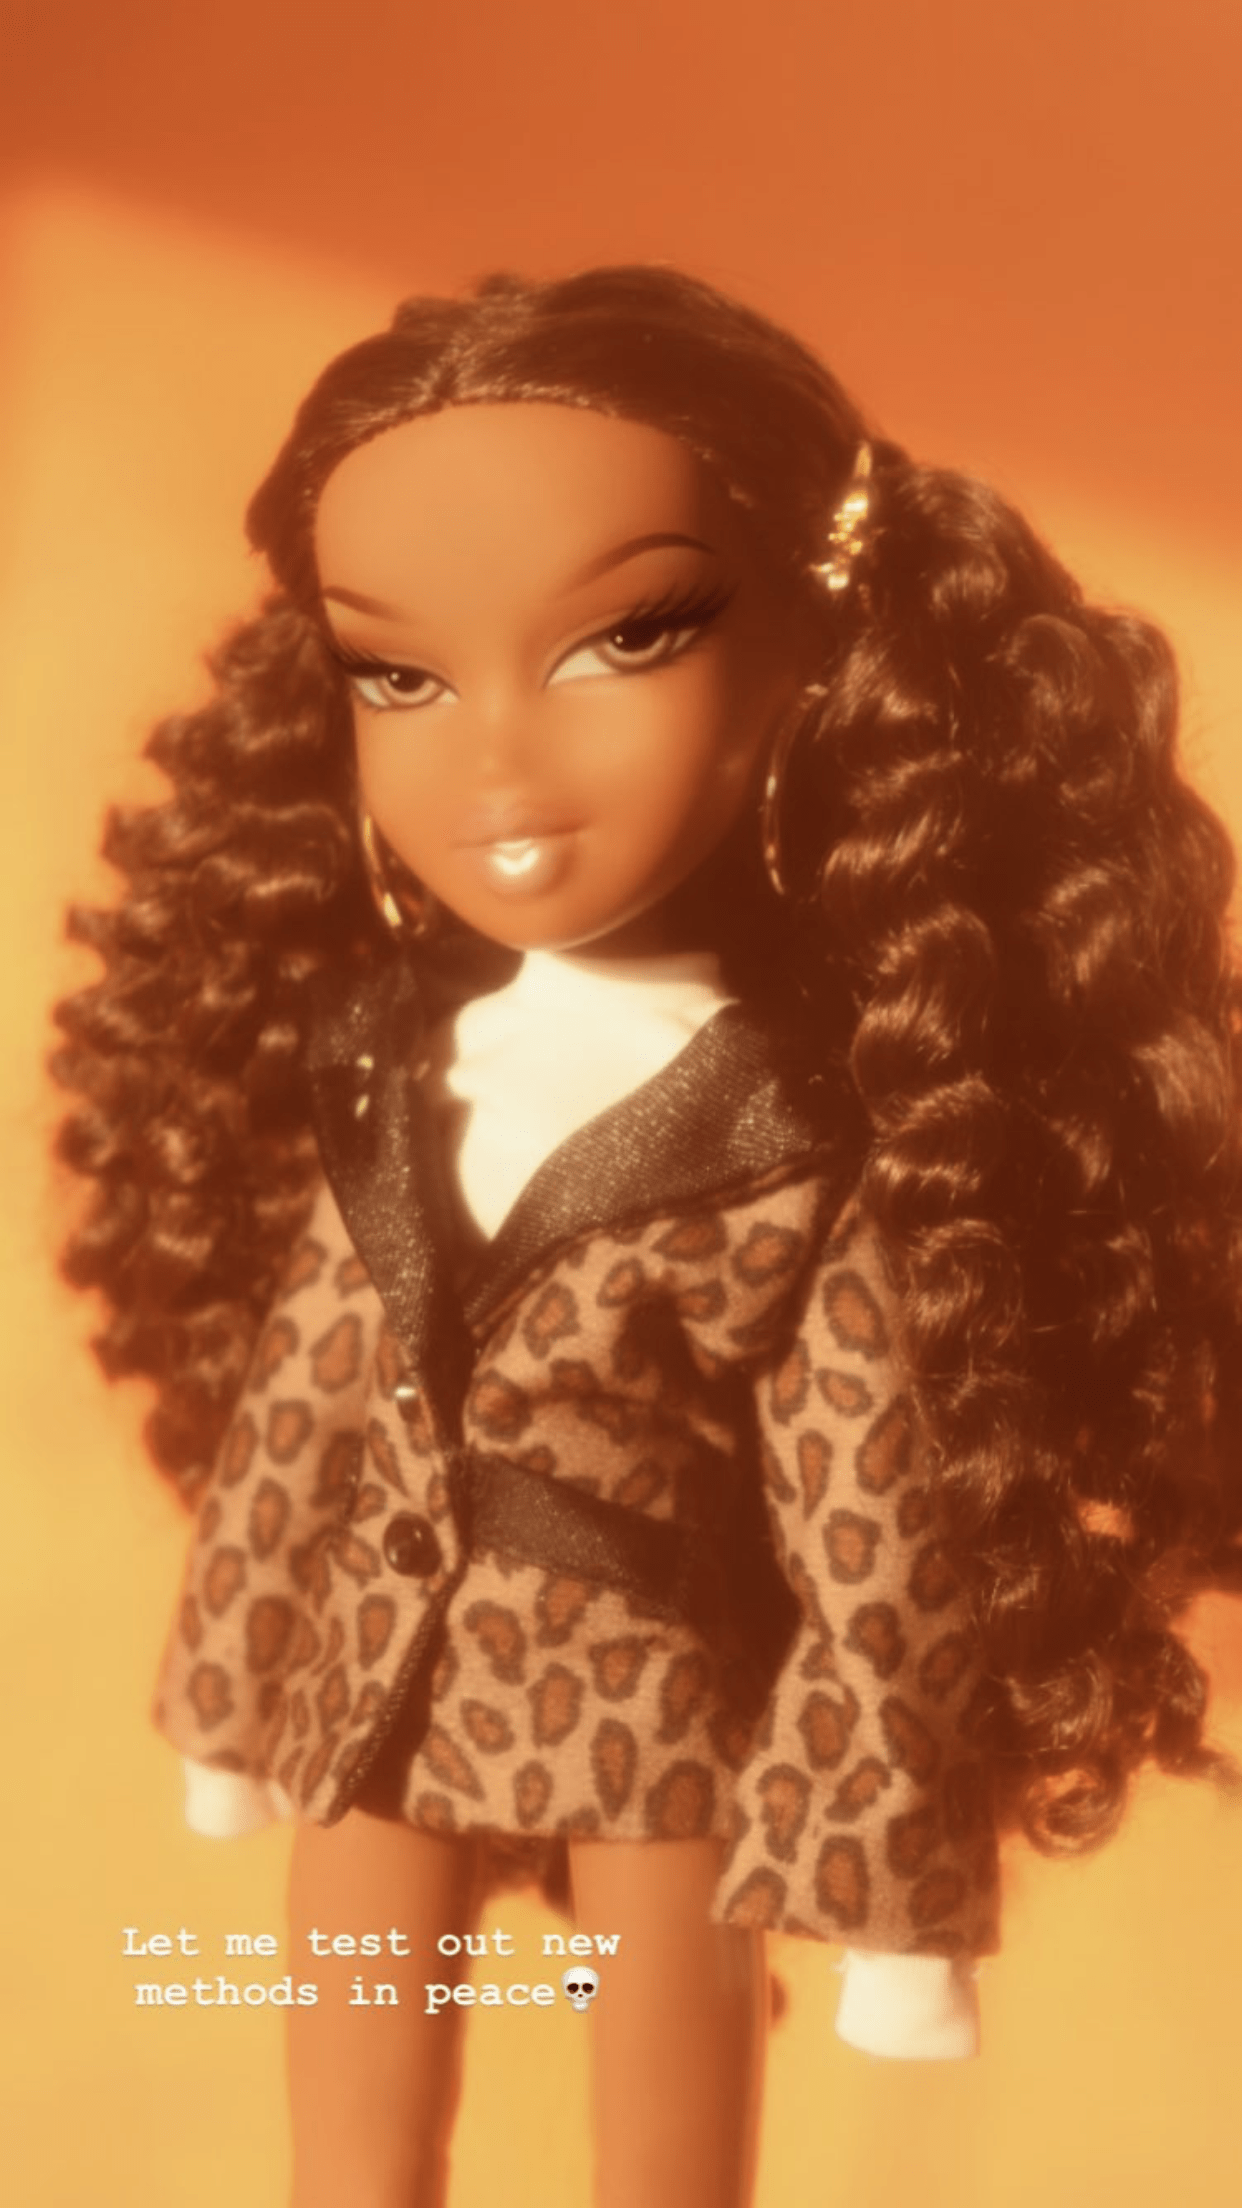 A doll with curly hair and leopard print clothing - Bratz